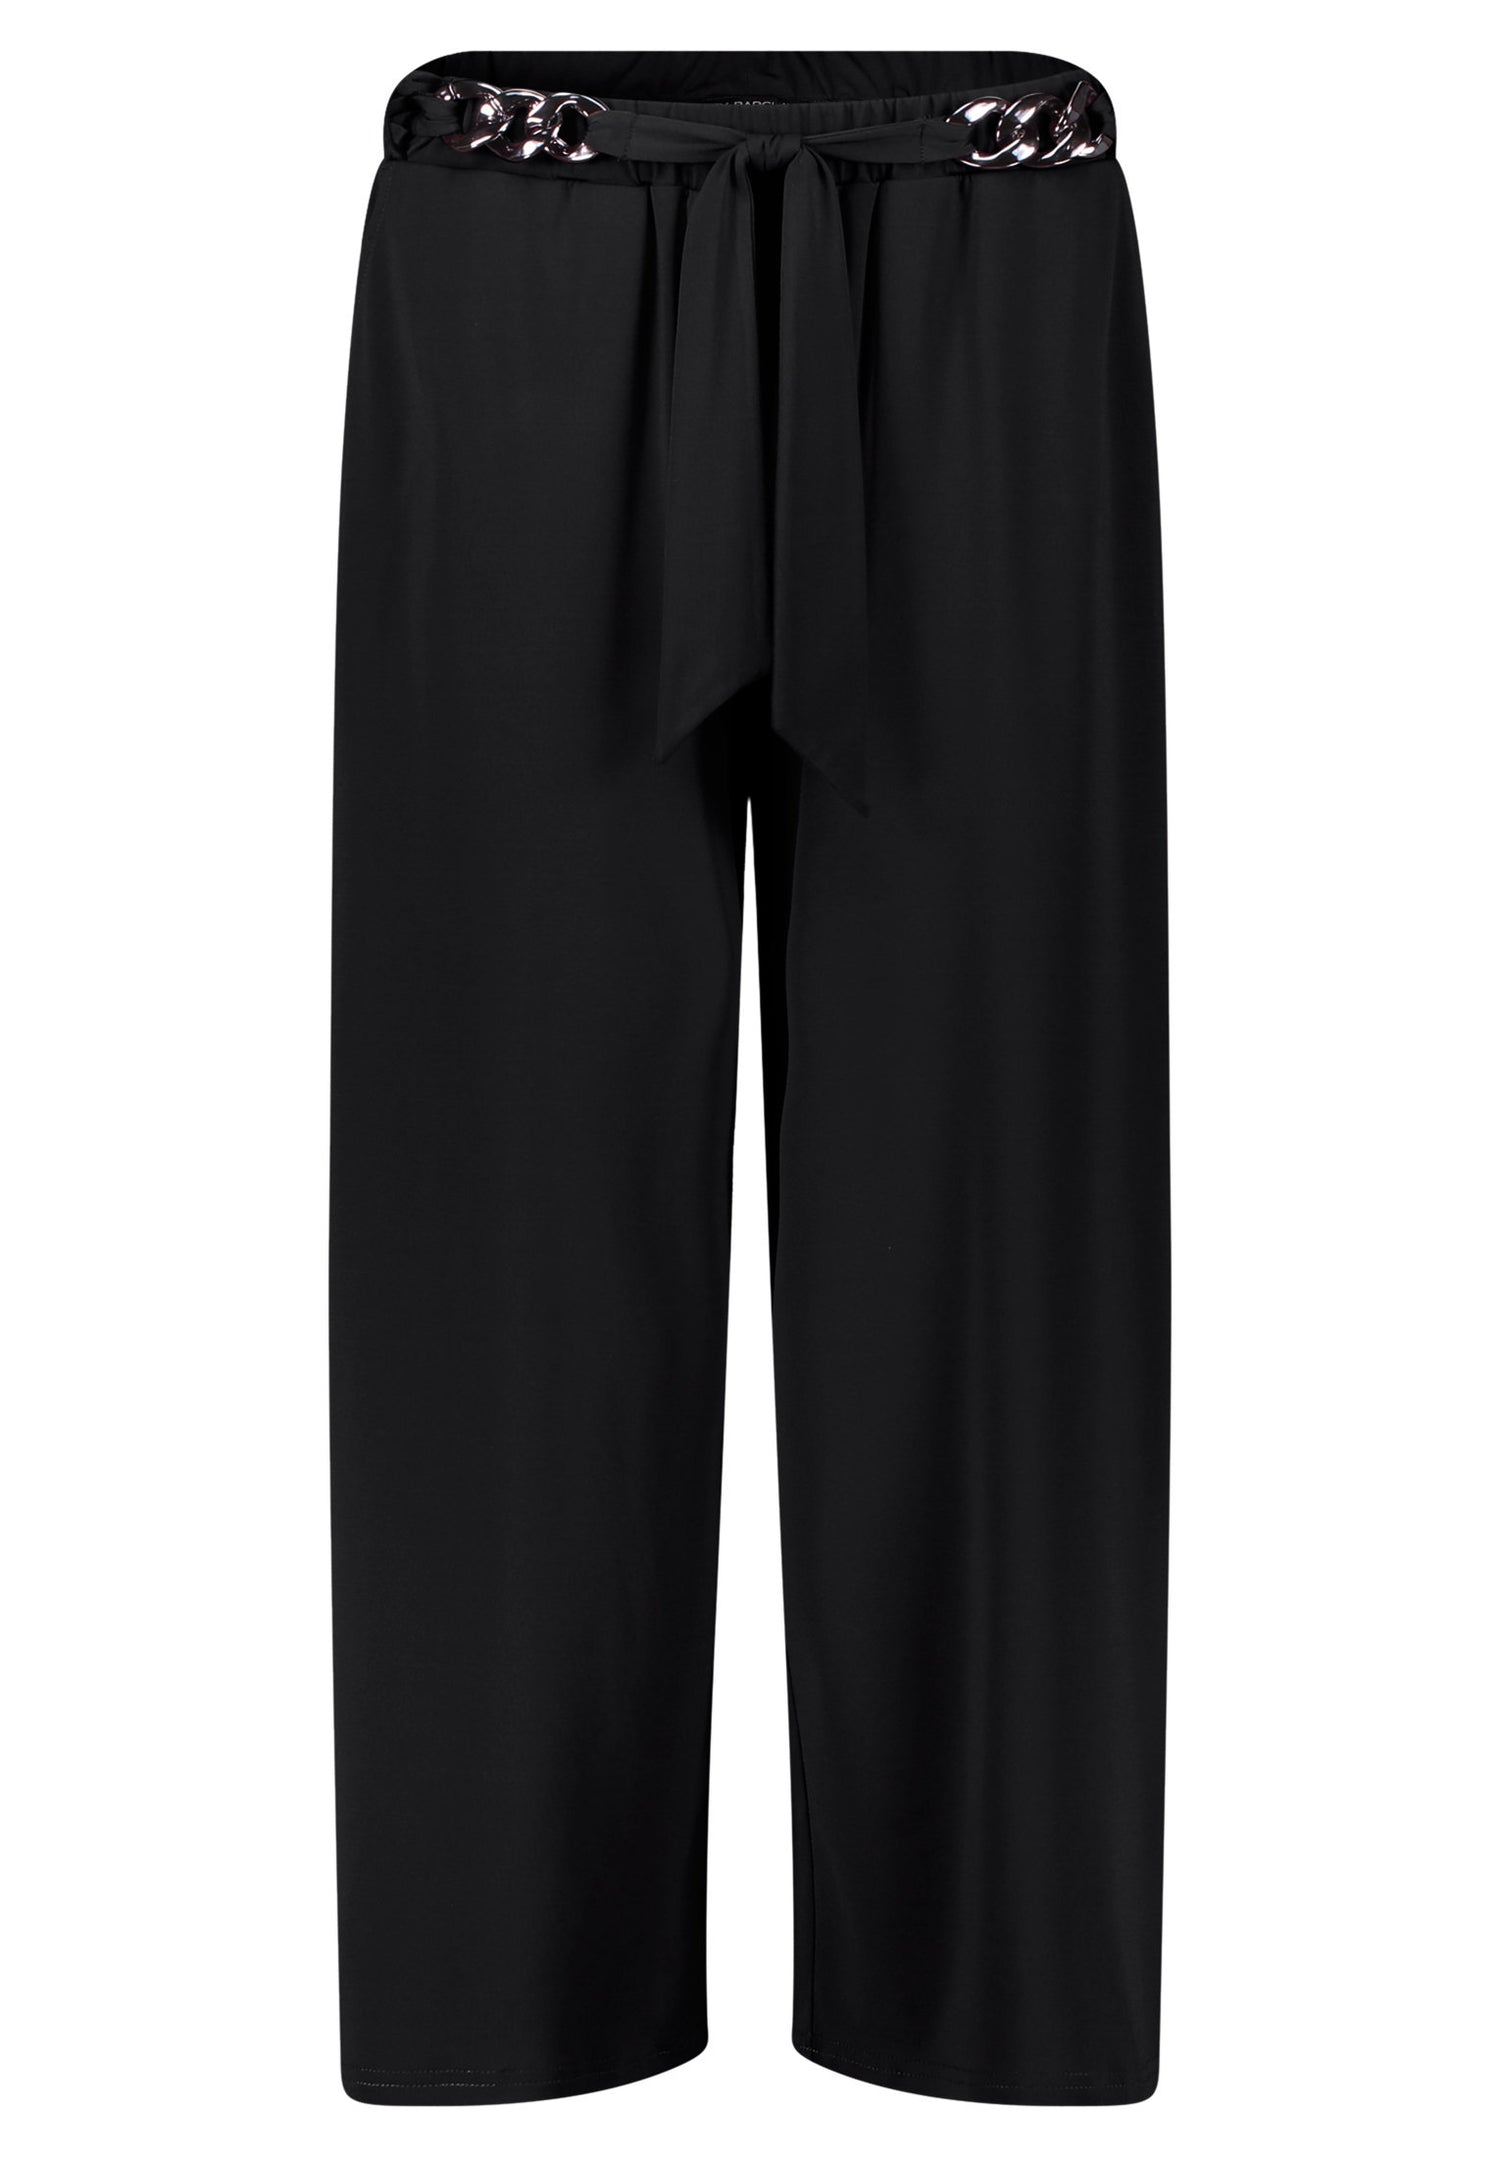 Culottes With Elastic Waistband_6808-1217_9045_01